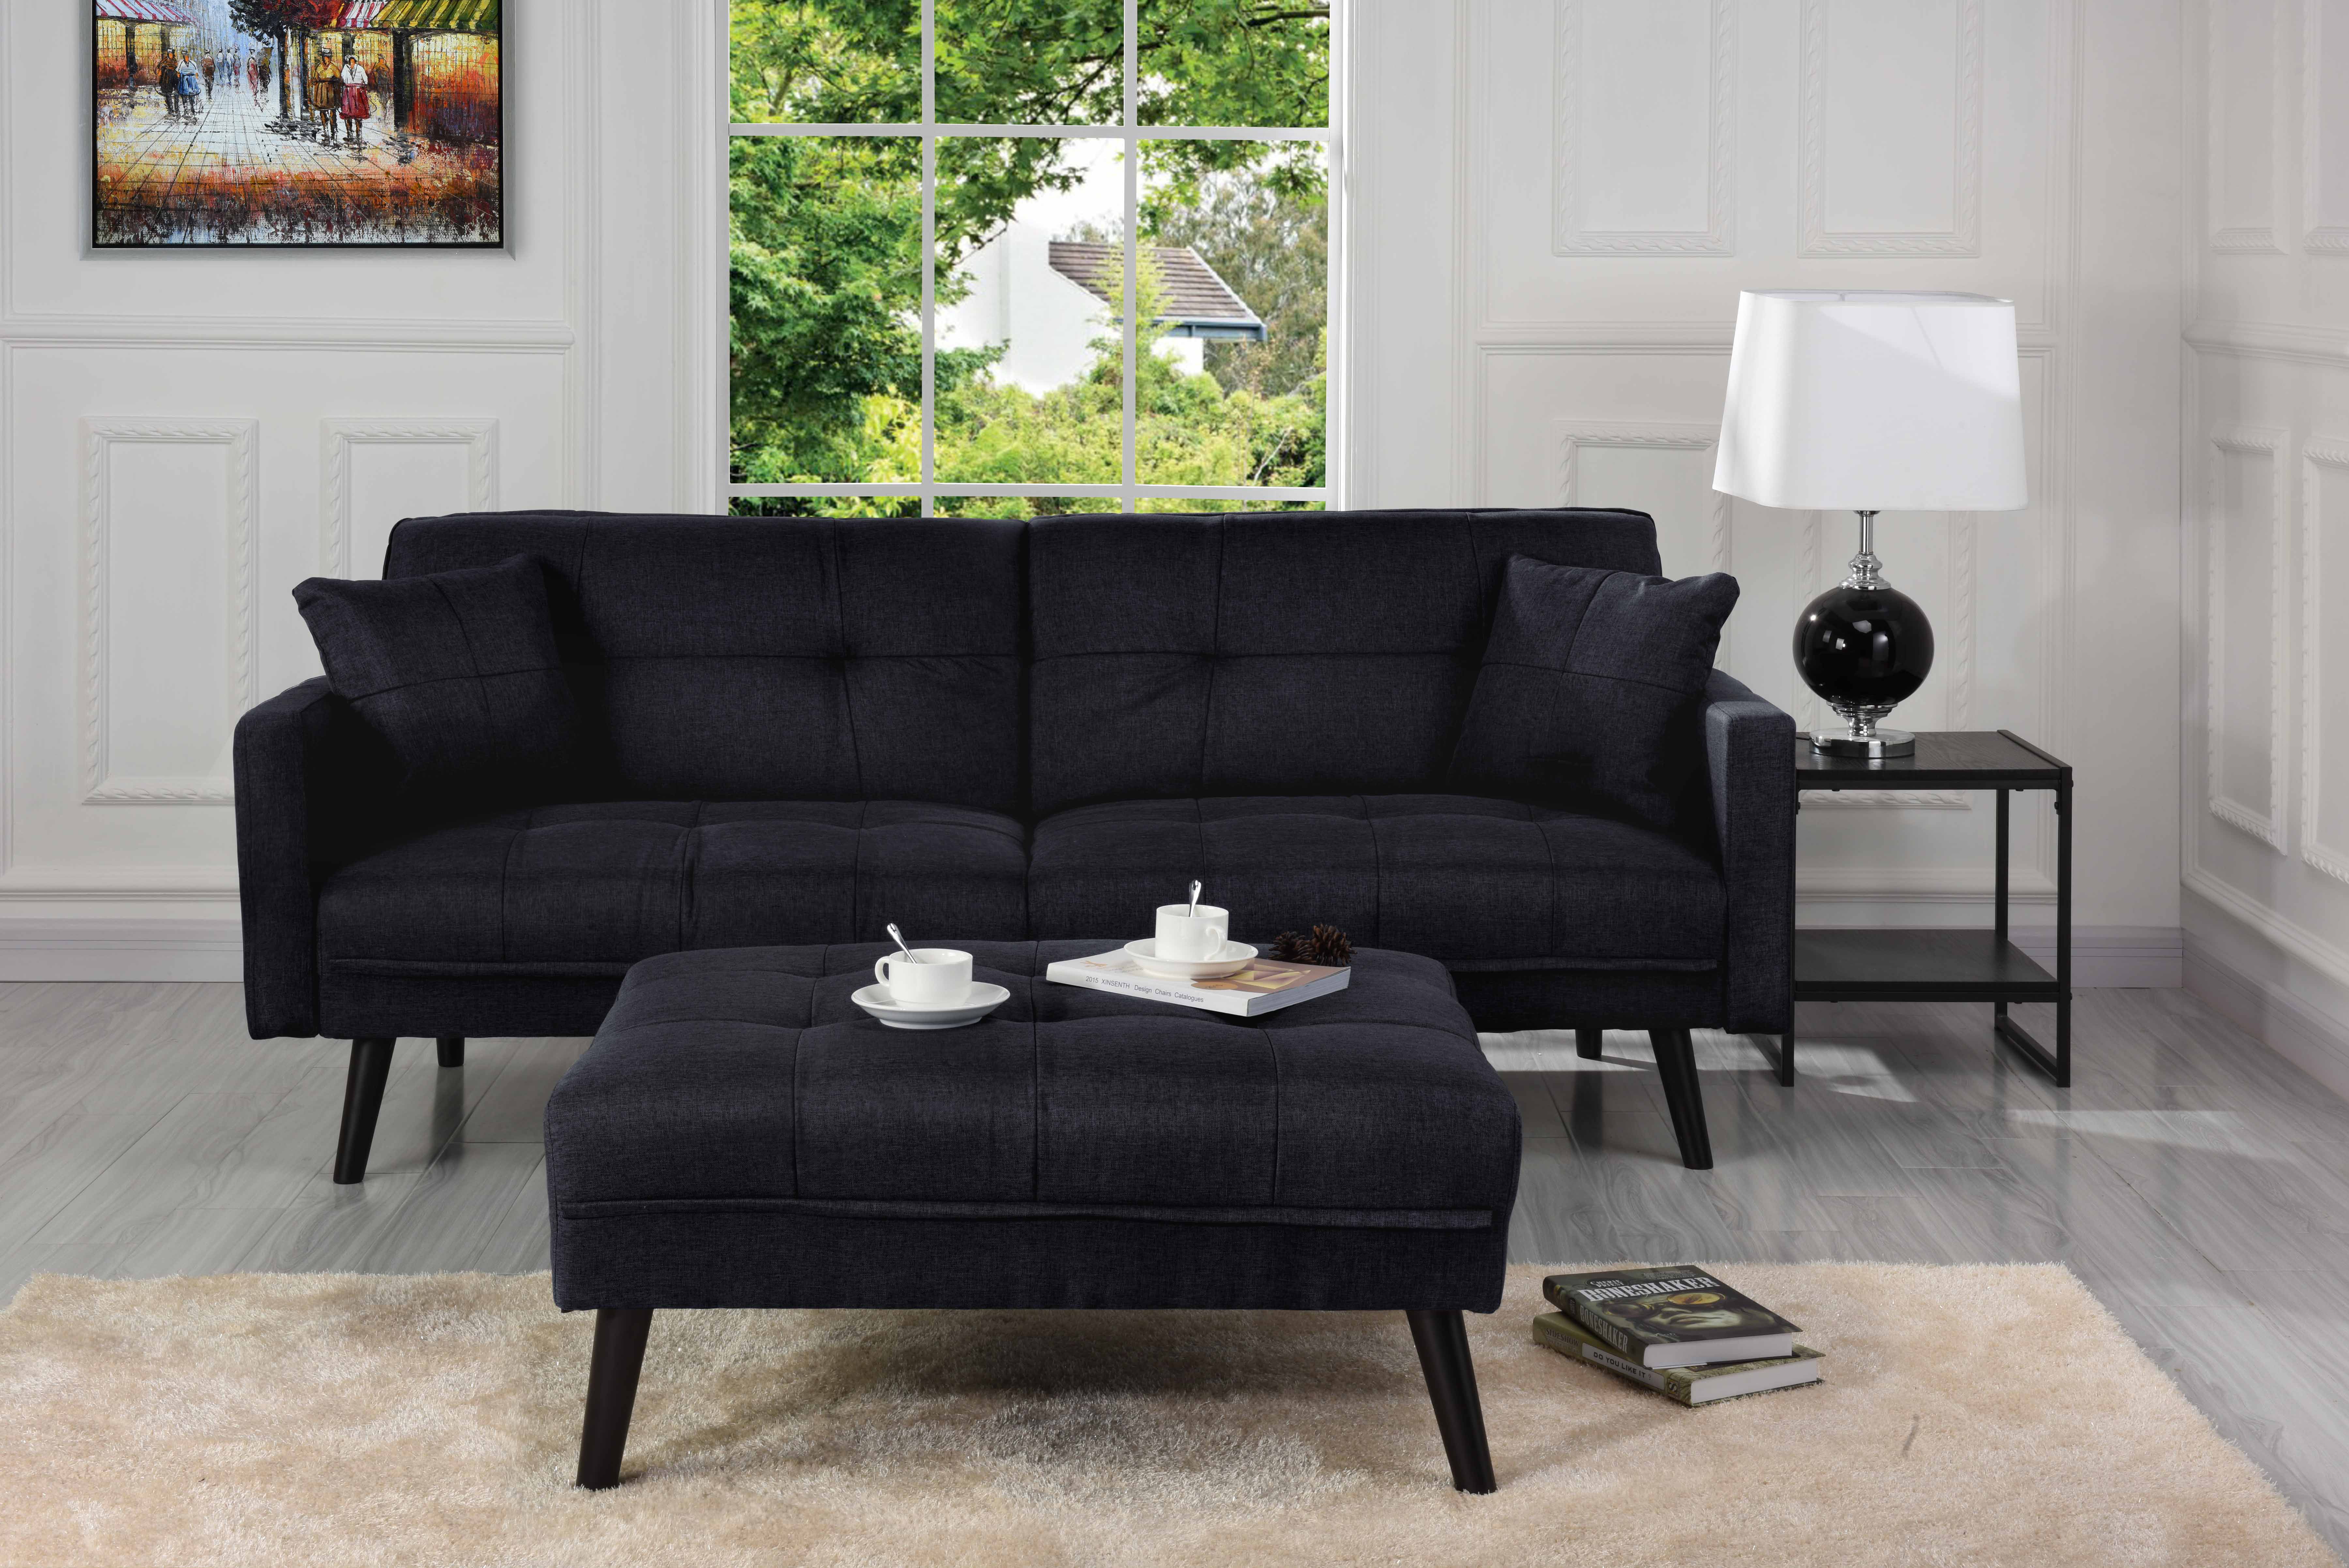 sofamania two piece sofa bed